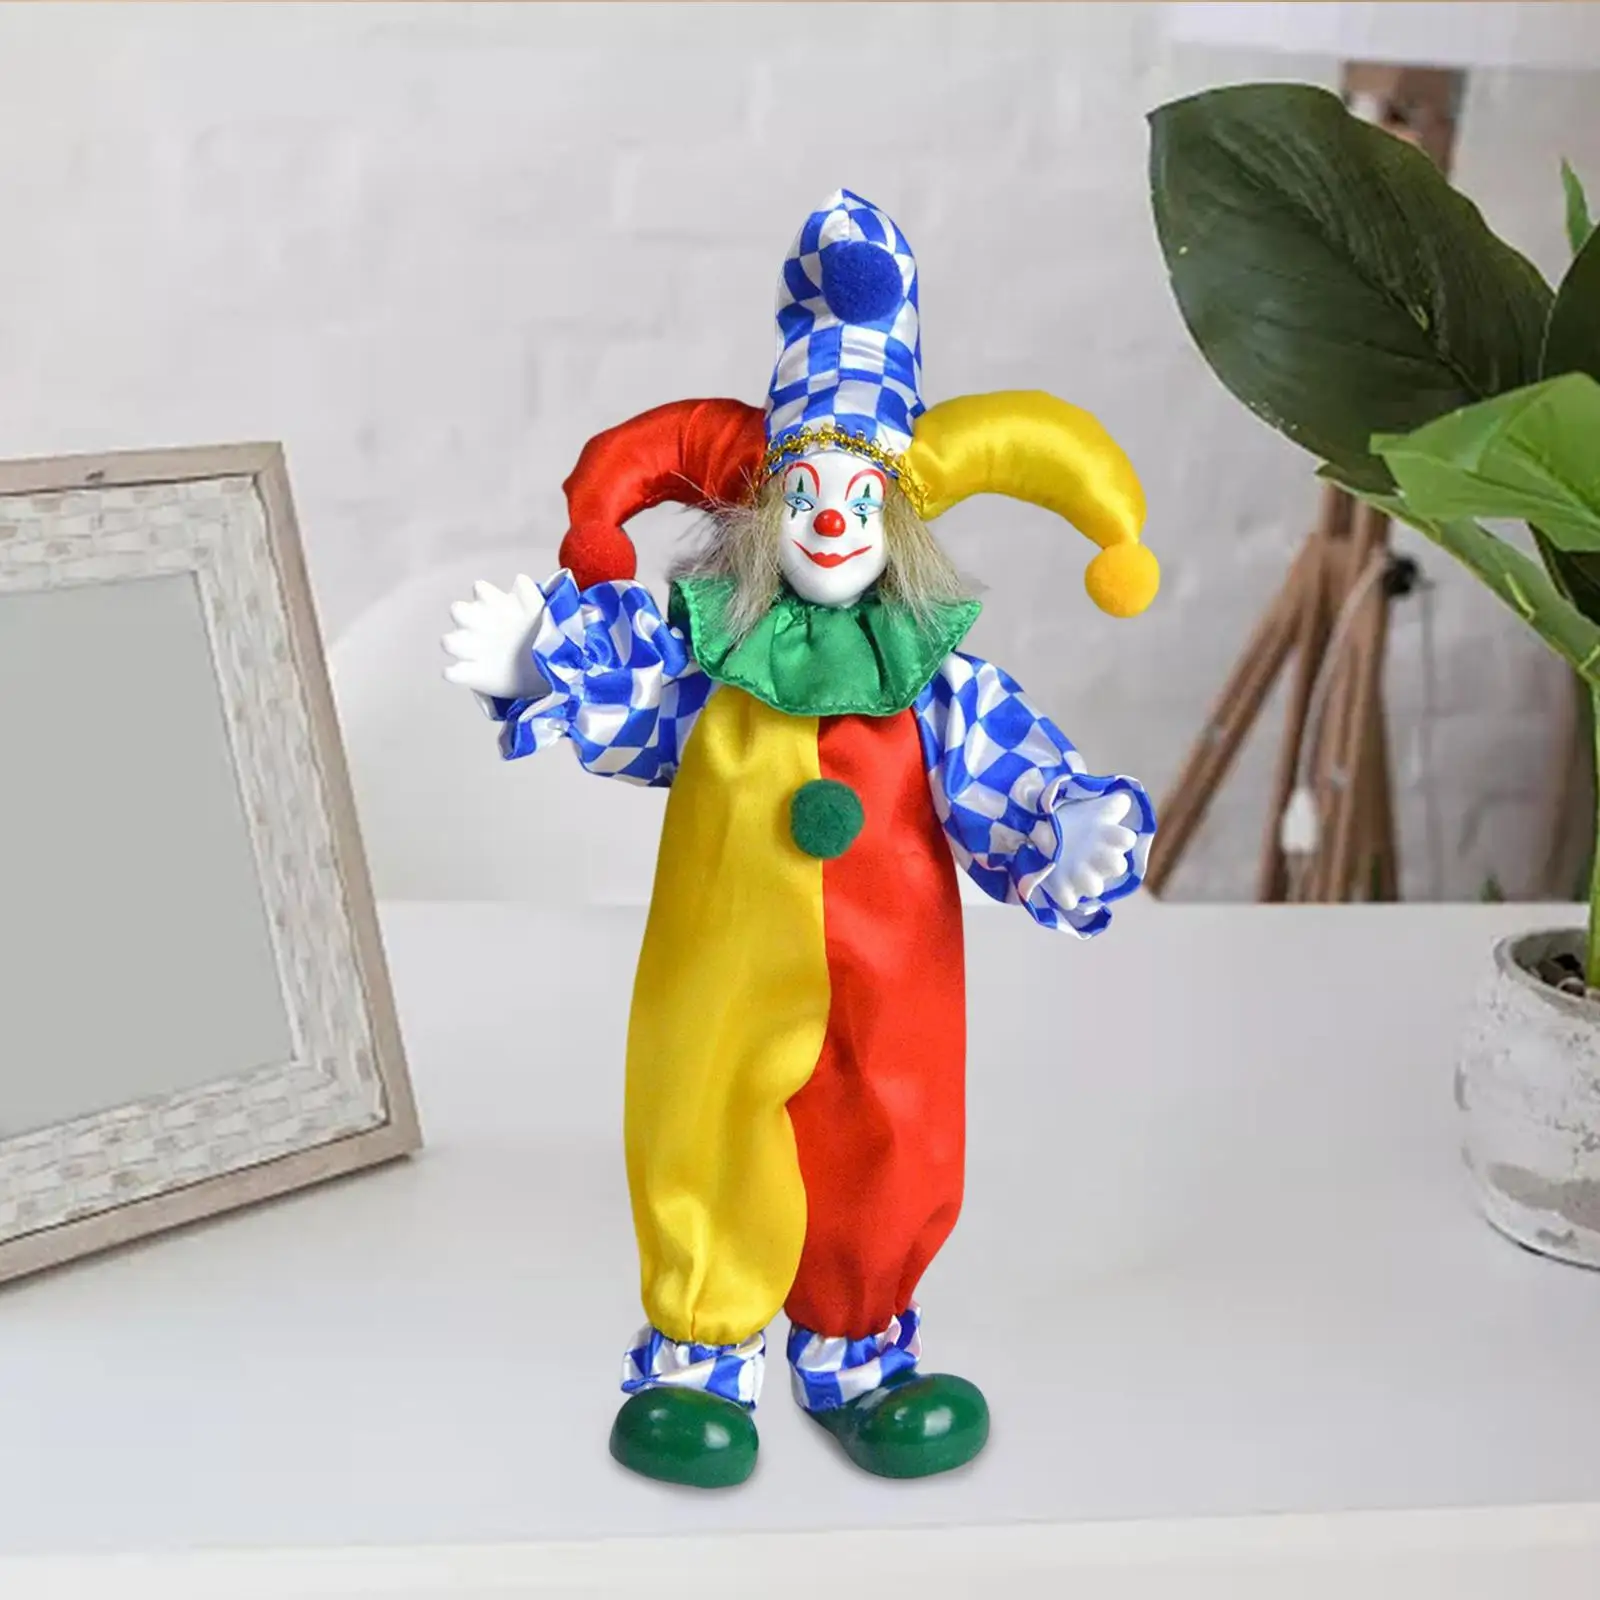 24cm Tall Clown Doll Figure Movable Decorative for Living Room Office Gifts